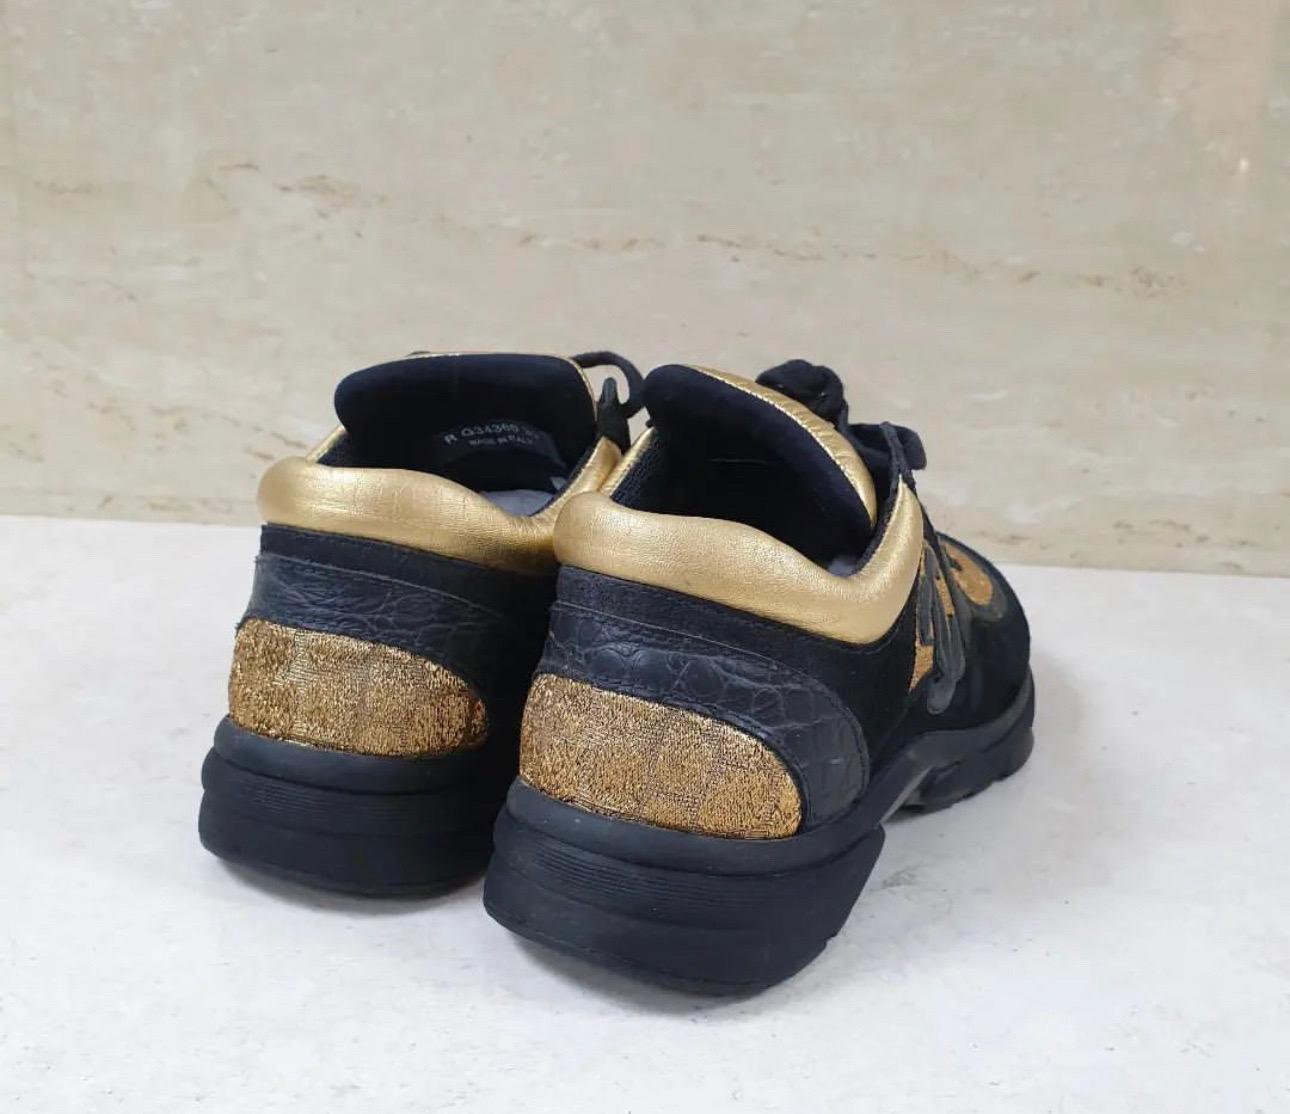 Special edition

Chanel sneakers in black suede  and gold fabric with a crocodile effect.

Sz.39

Condition is very good.Signs of wear seen on pics

No original packaging.